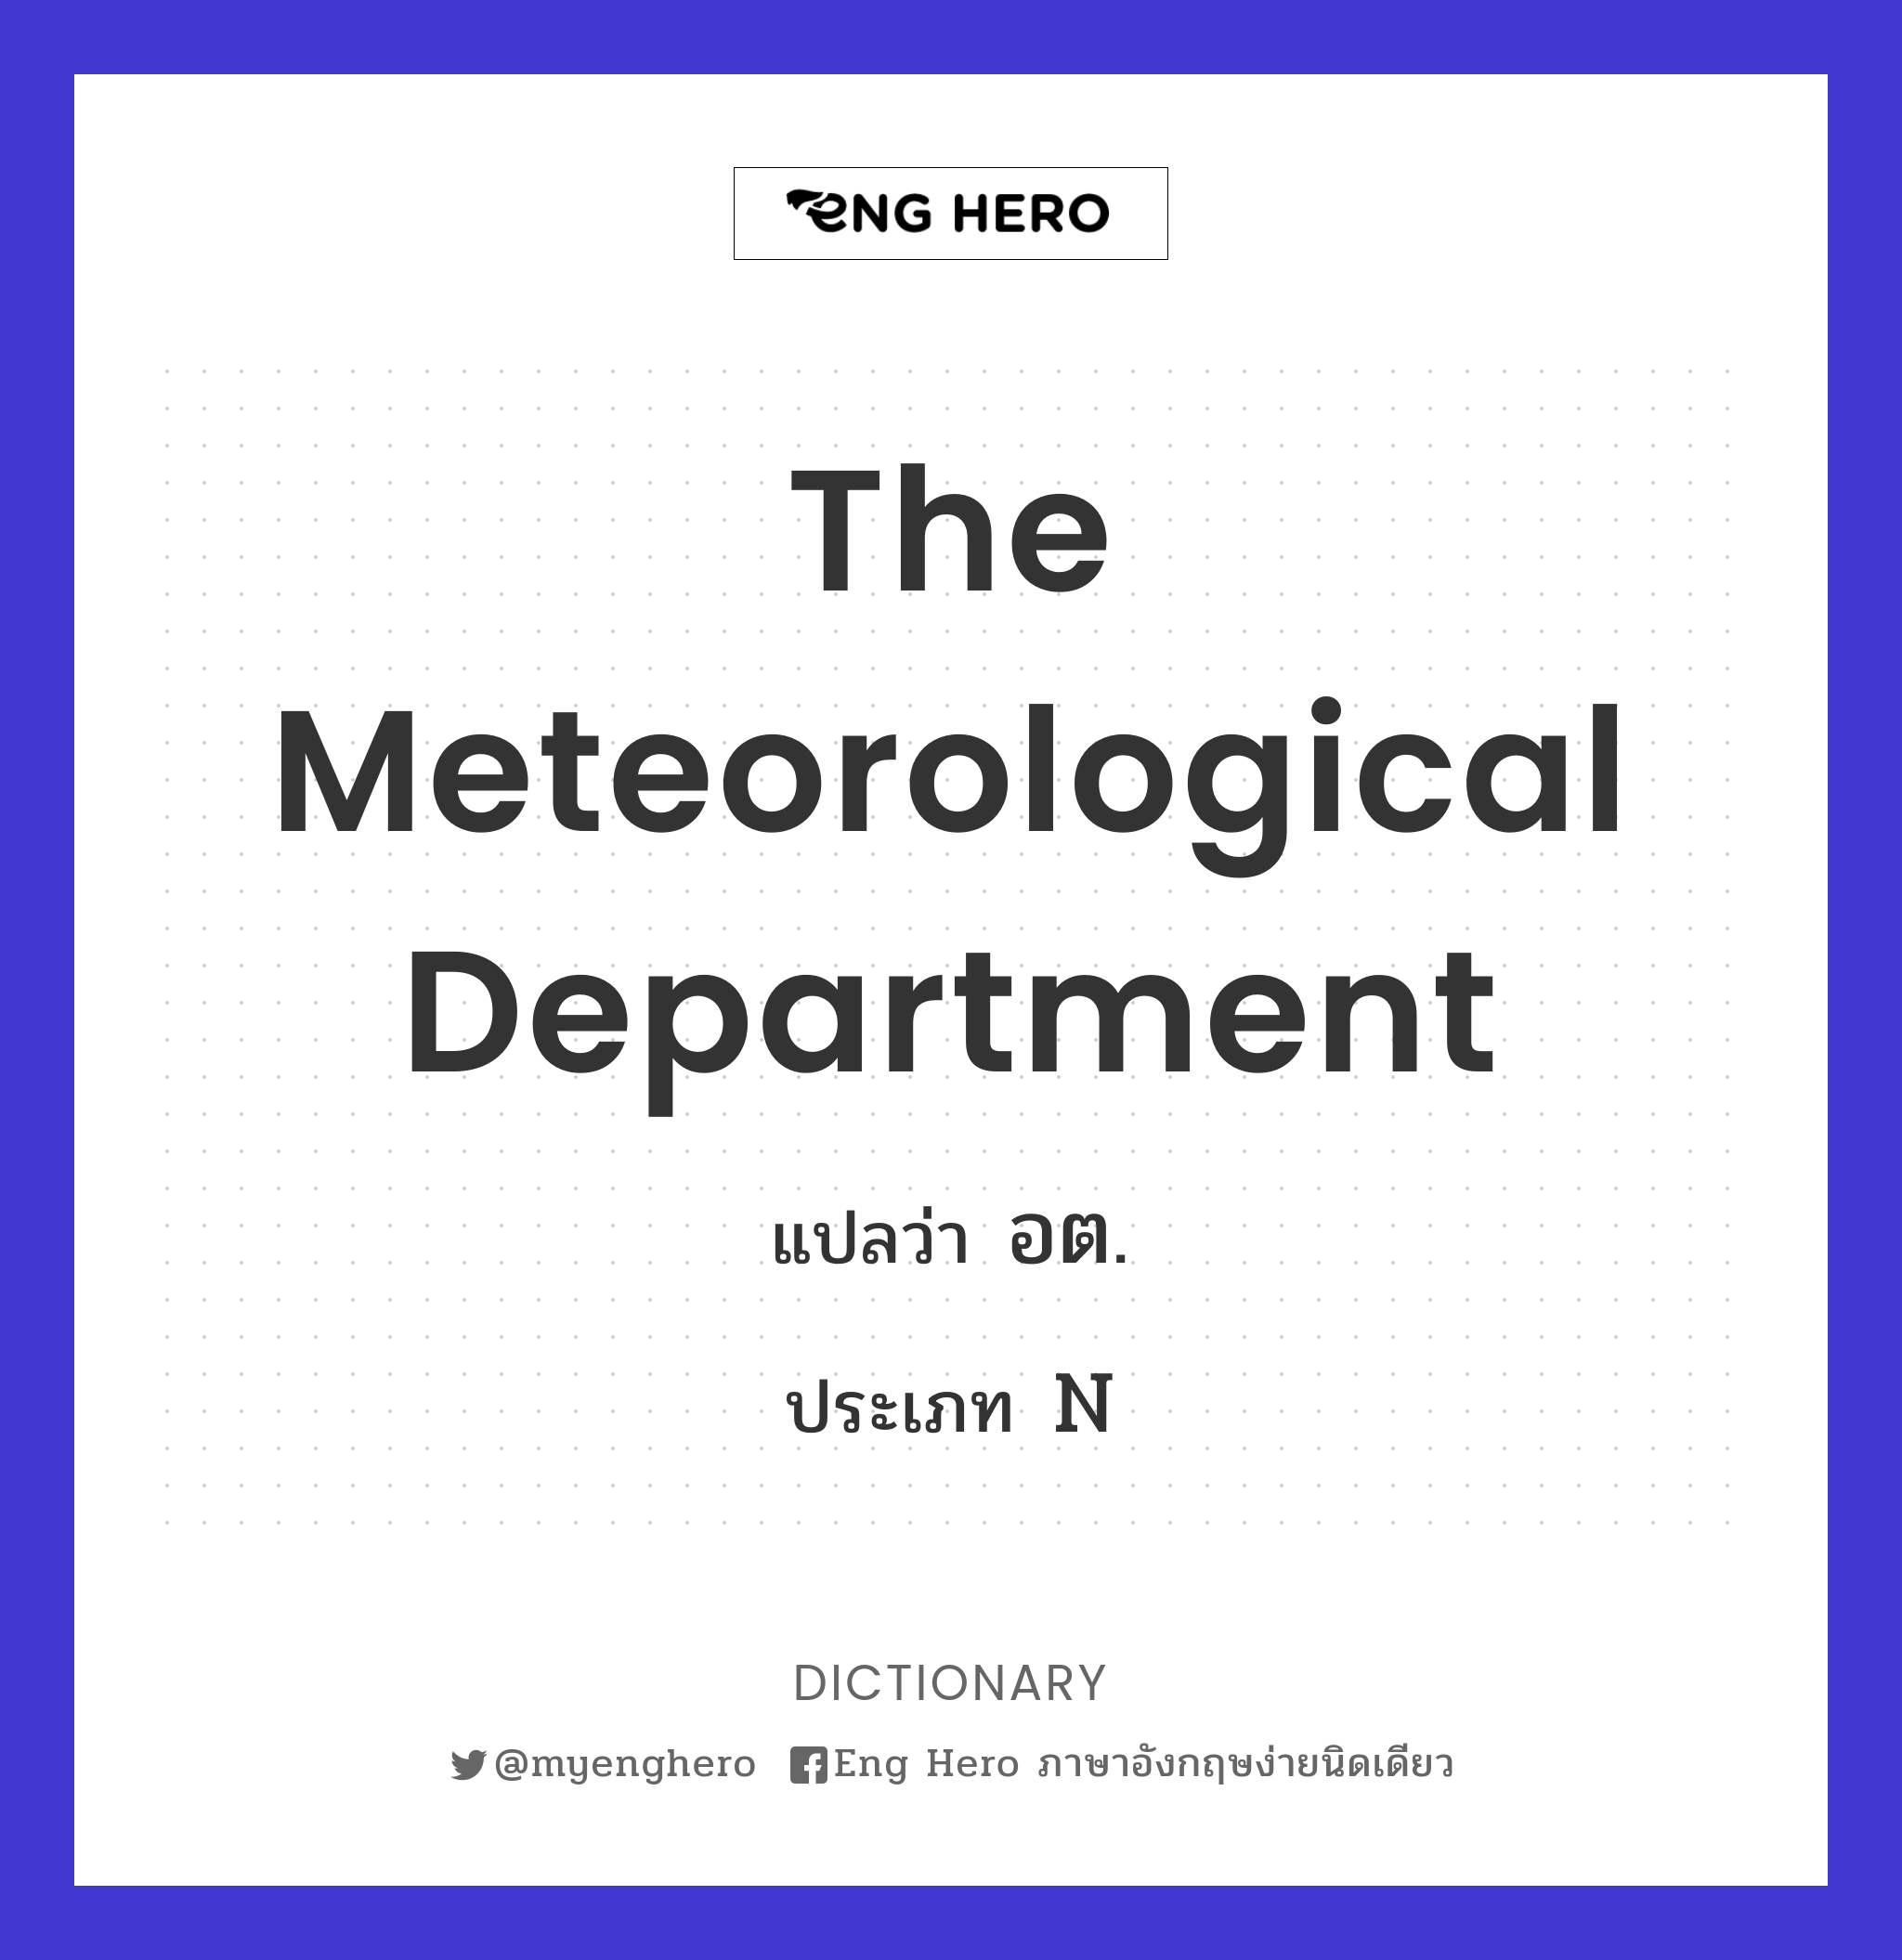 The Meteorological Department